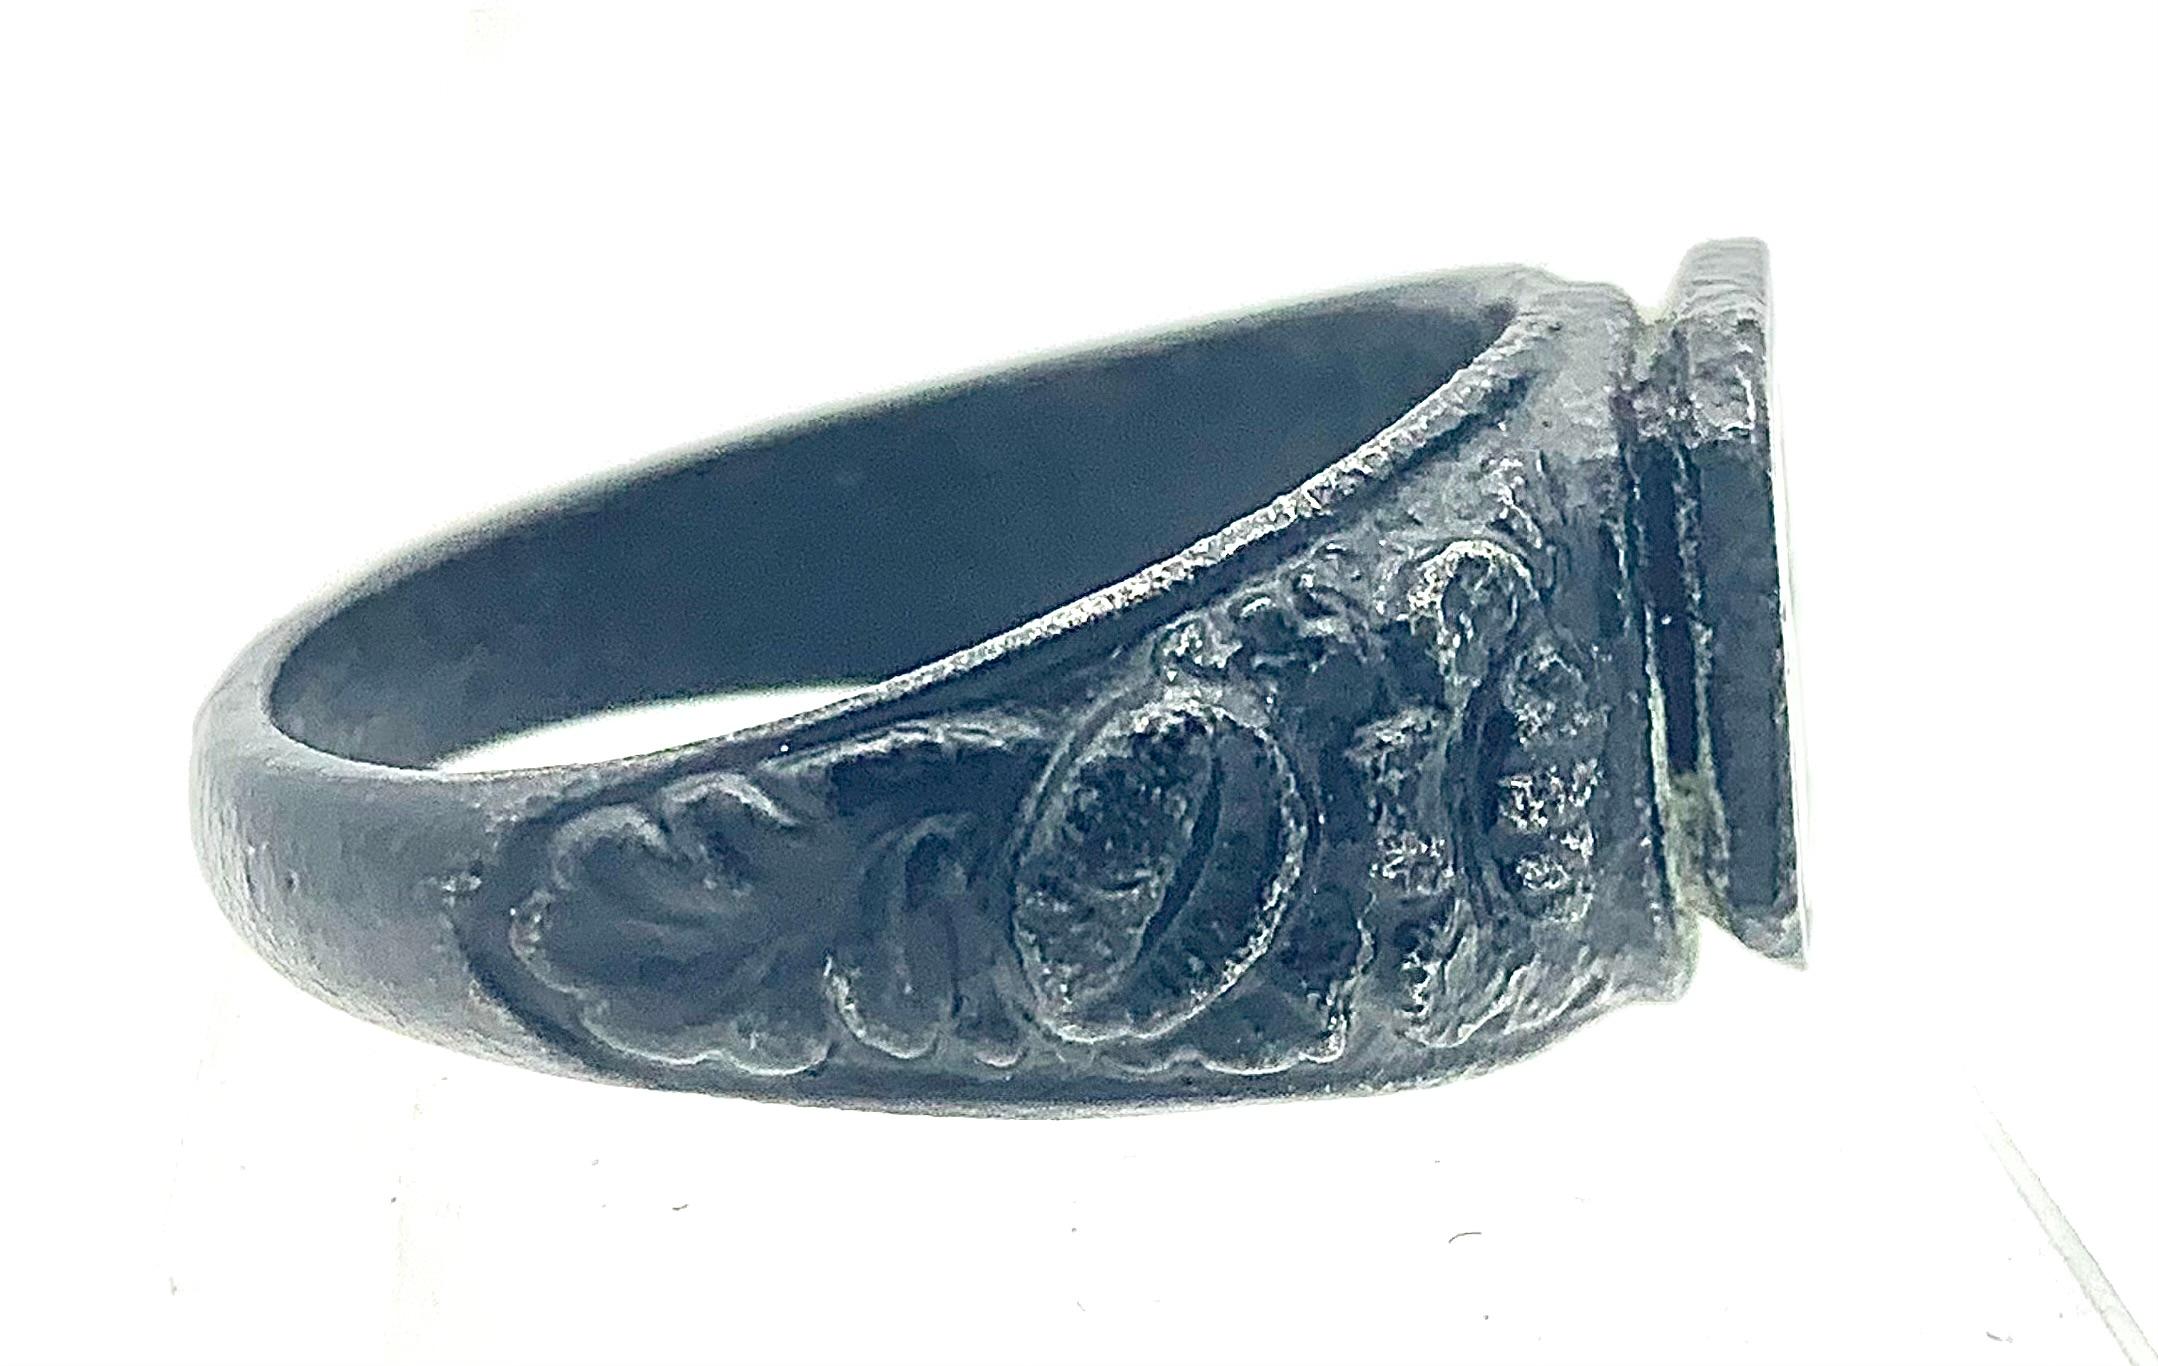 This unusual cast Iron signet ring features a finely designed bouquet of fruits and flowers in a high footed vase.
The ring shoulders are decorated with flowers and leaves.